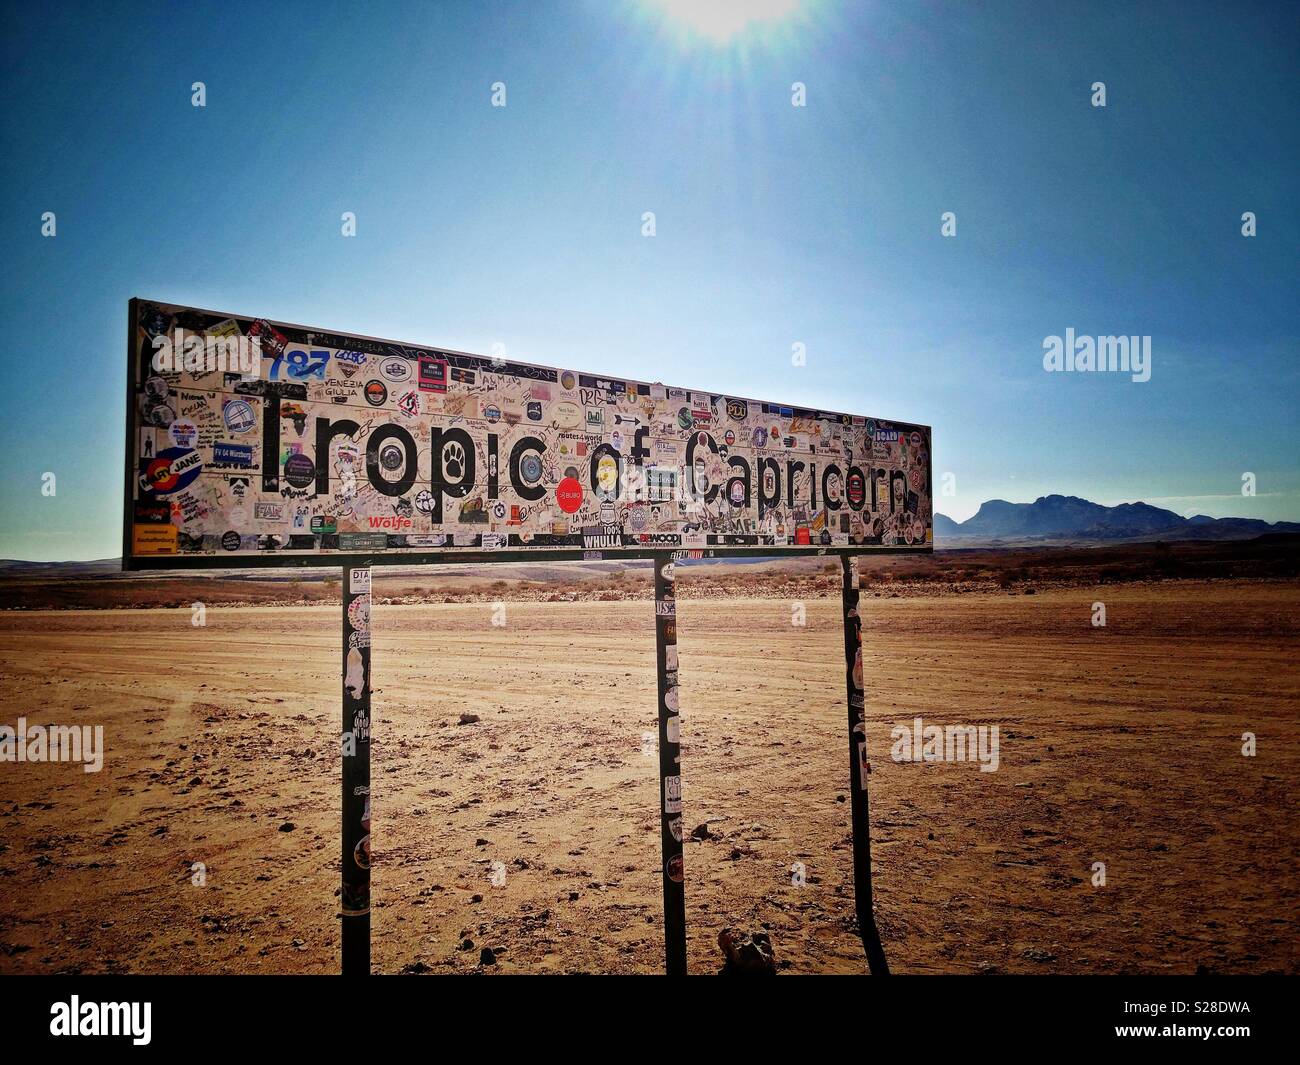 Tropic of Capricorn Sign in Namibia. Stock Photo